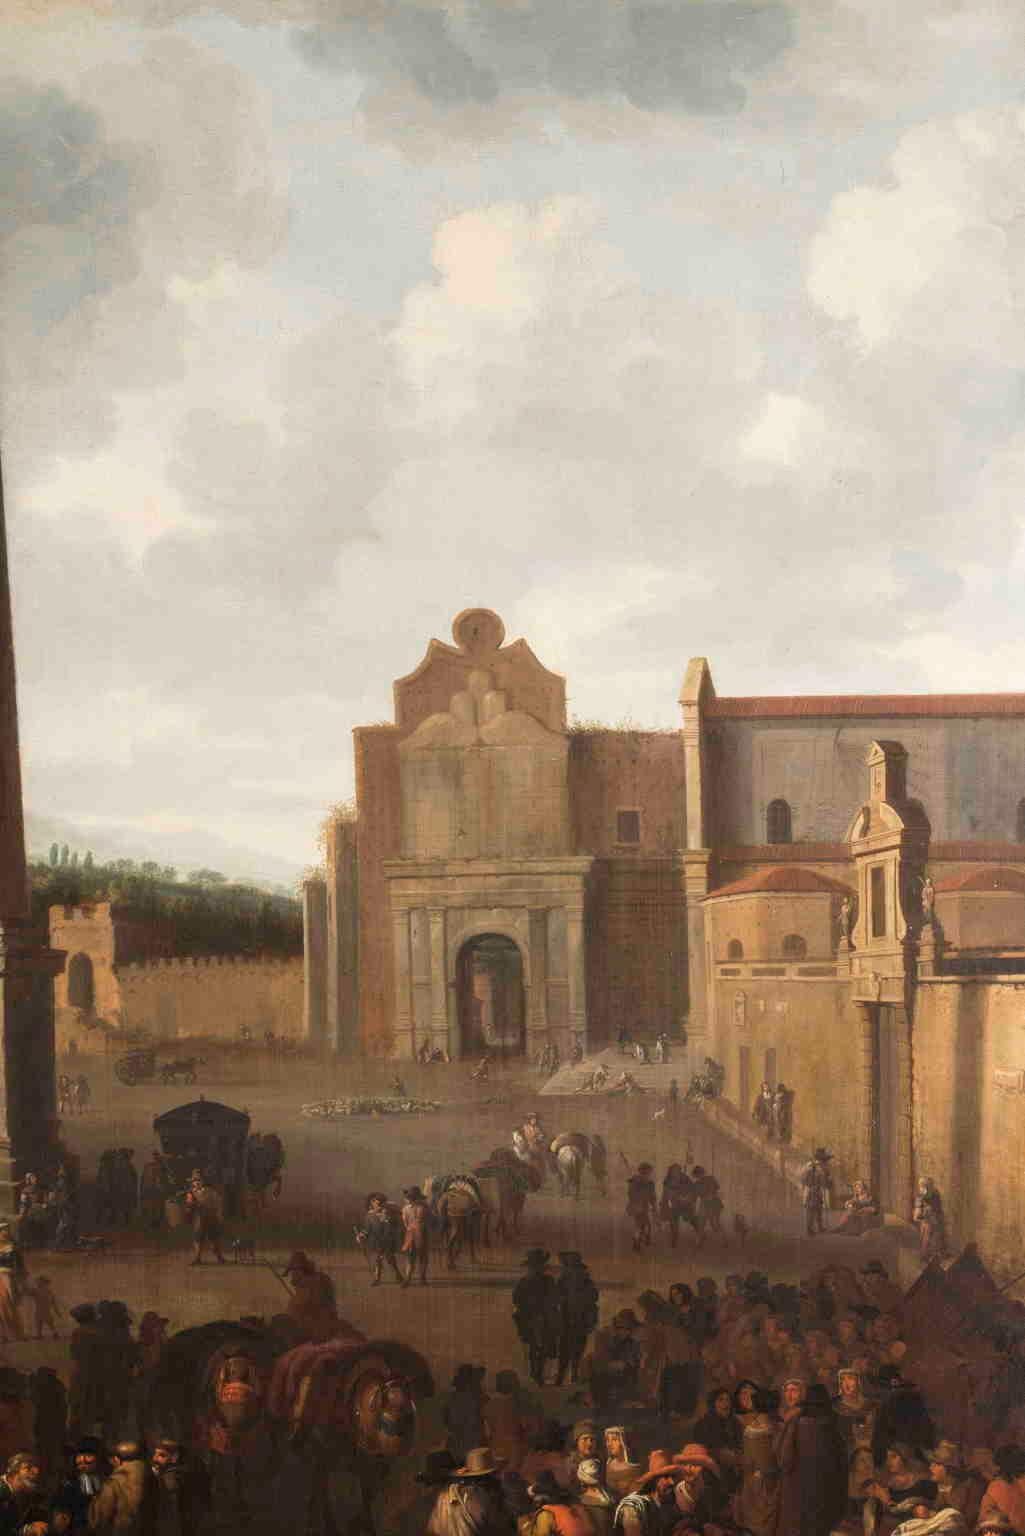 The Market in Piazza del Popolo is a work by the Flemish painter Jacob van Huchtenburg, born in Haarlem and present, in the early 1660s, in Rome, in close contact with his compatriot artists who had chosen the everyday setting genre, mostly, in the